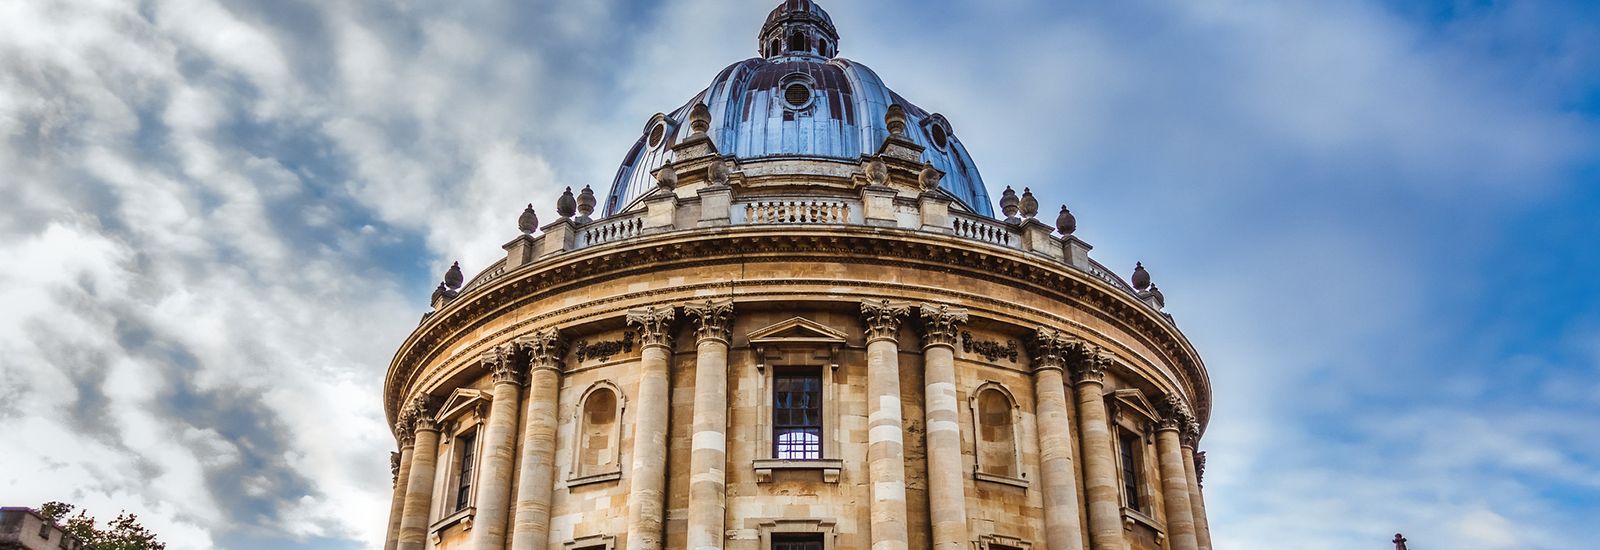 The Radcliffe Camera against a blue and cloudy sky